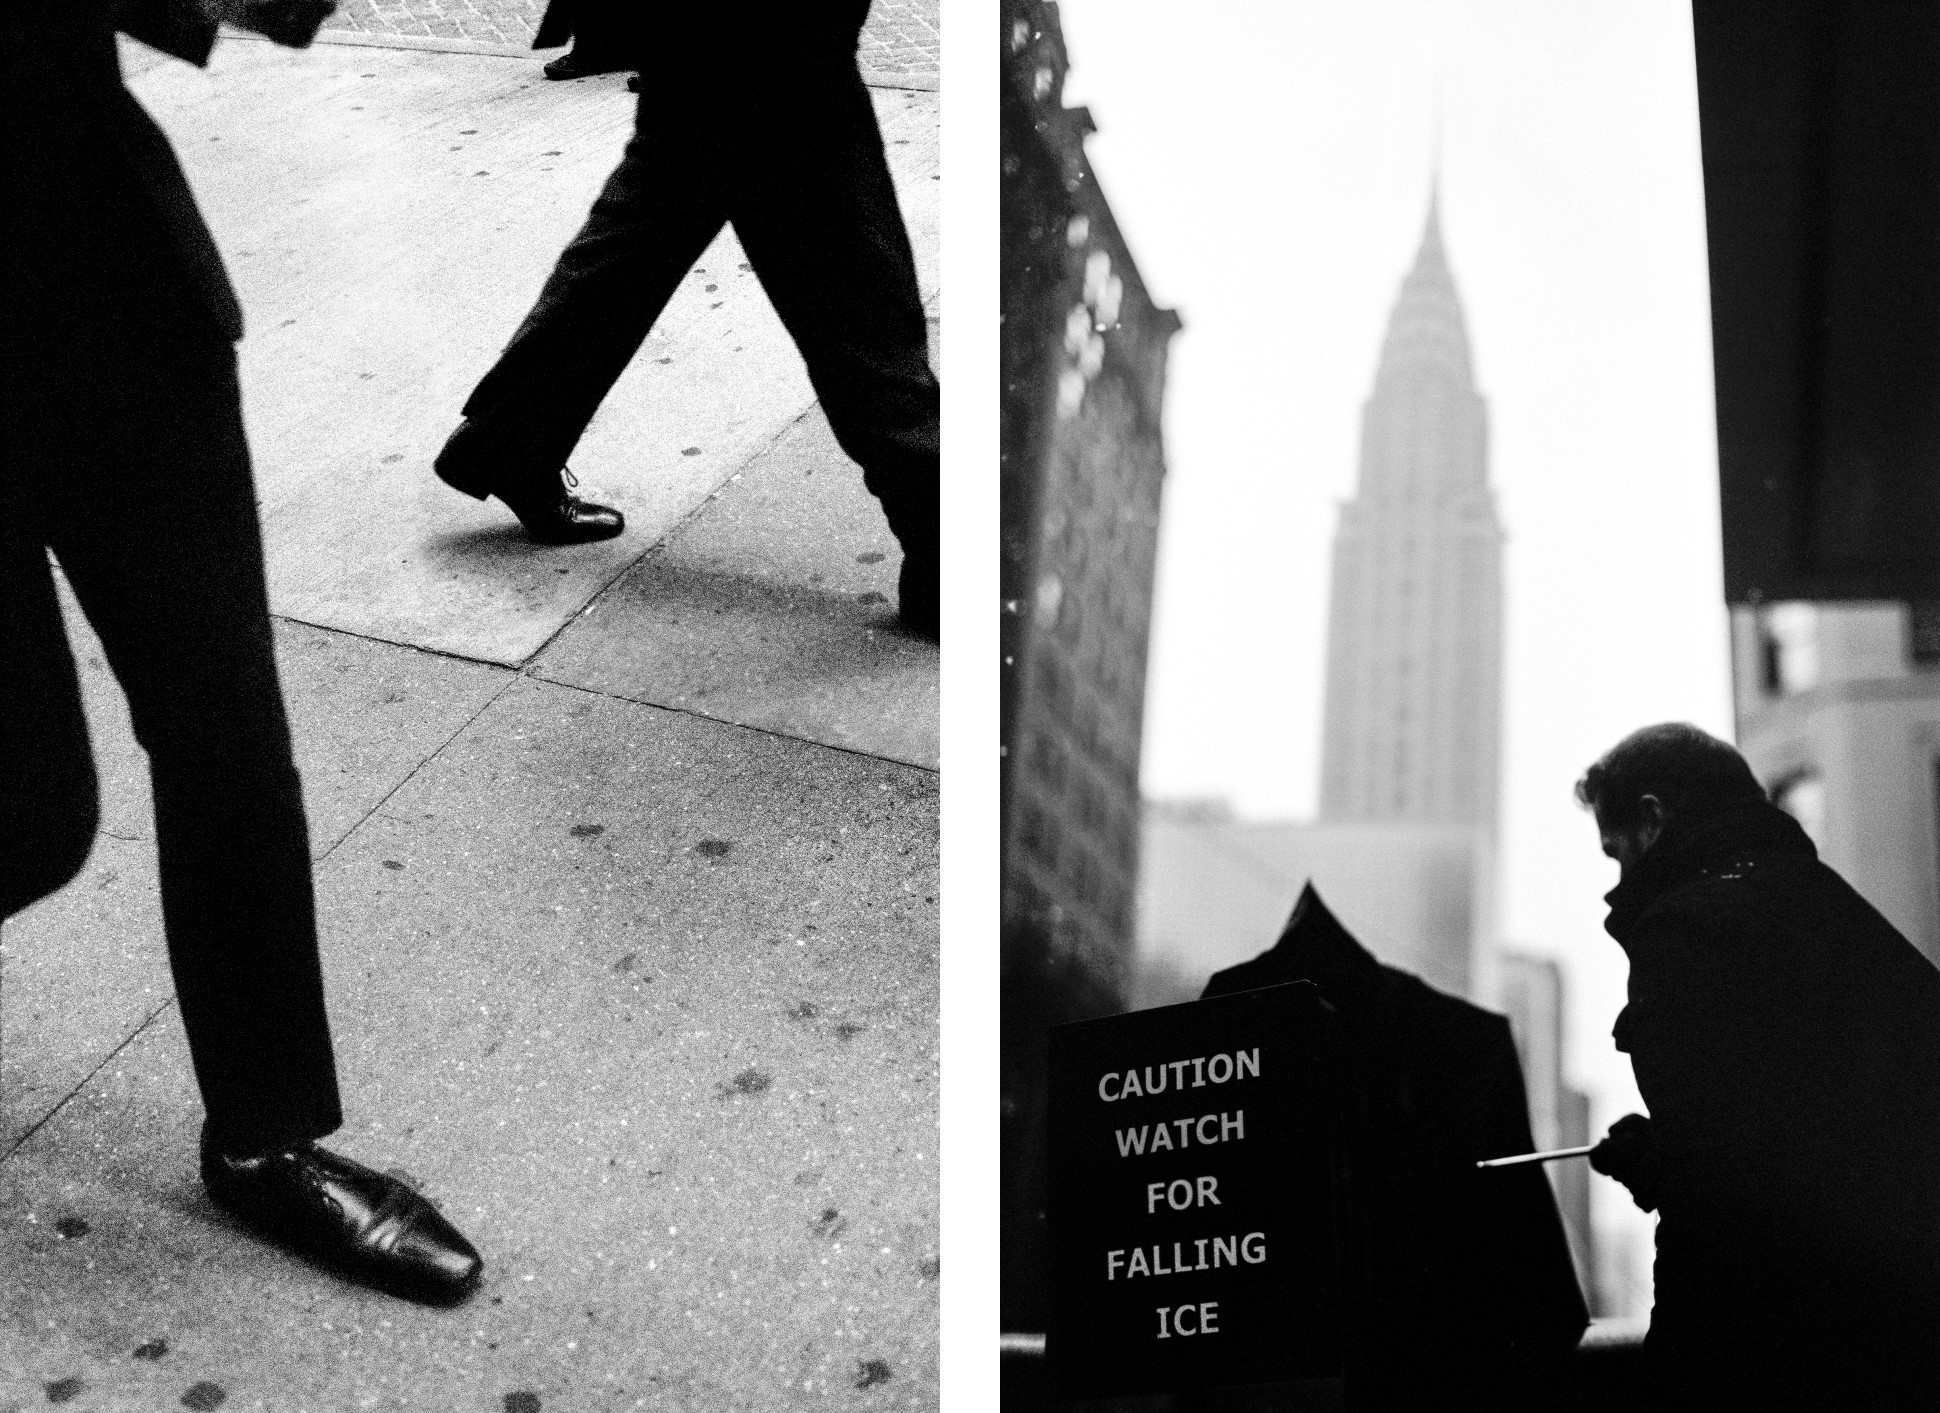 Left, walking on Wall Street. Right, man holding an umbrella next to sign that reads CAUTION WATCH FOR FALLING ICE